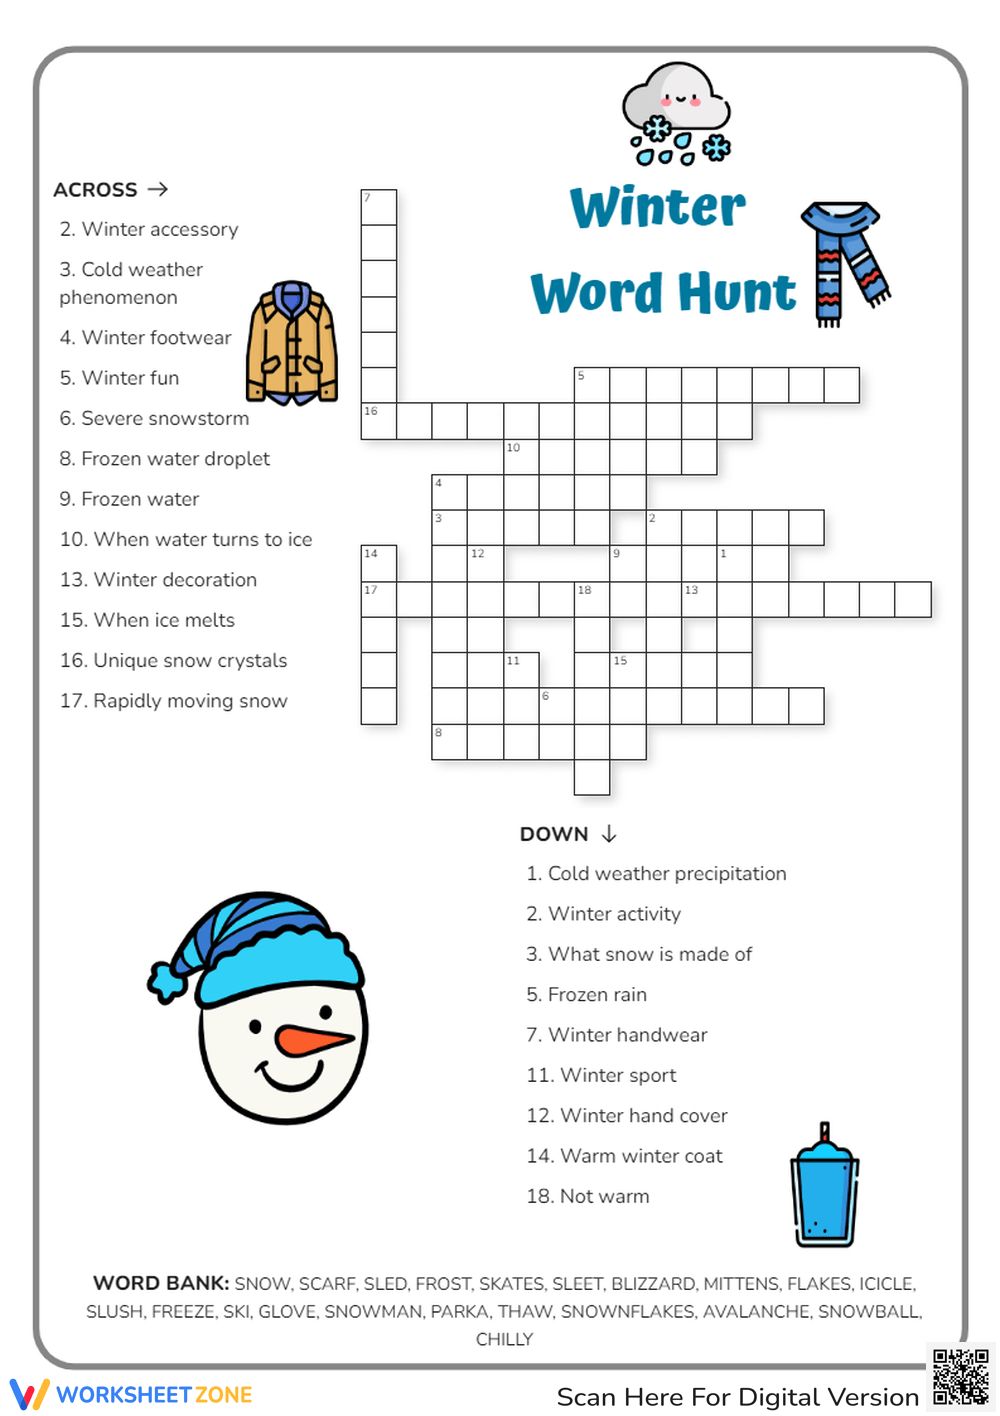 Free Winter Crossword Puzzle That Don t Let You Down